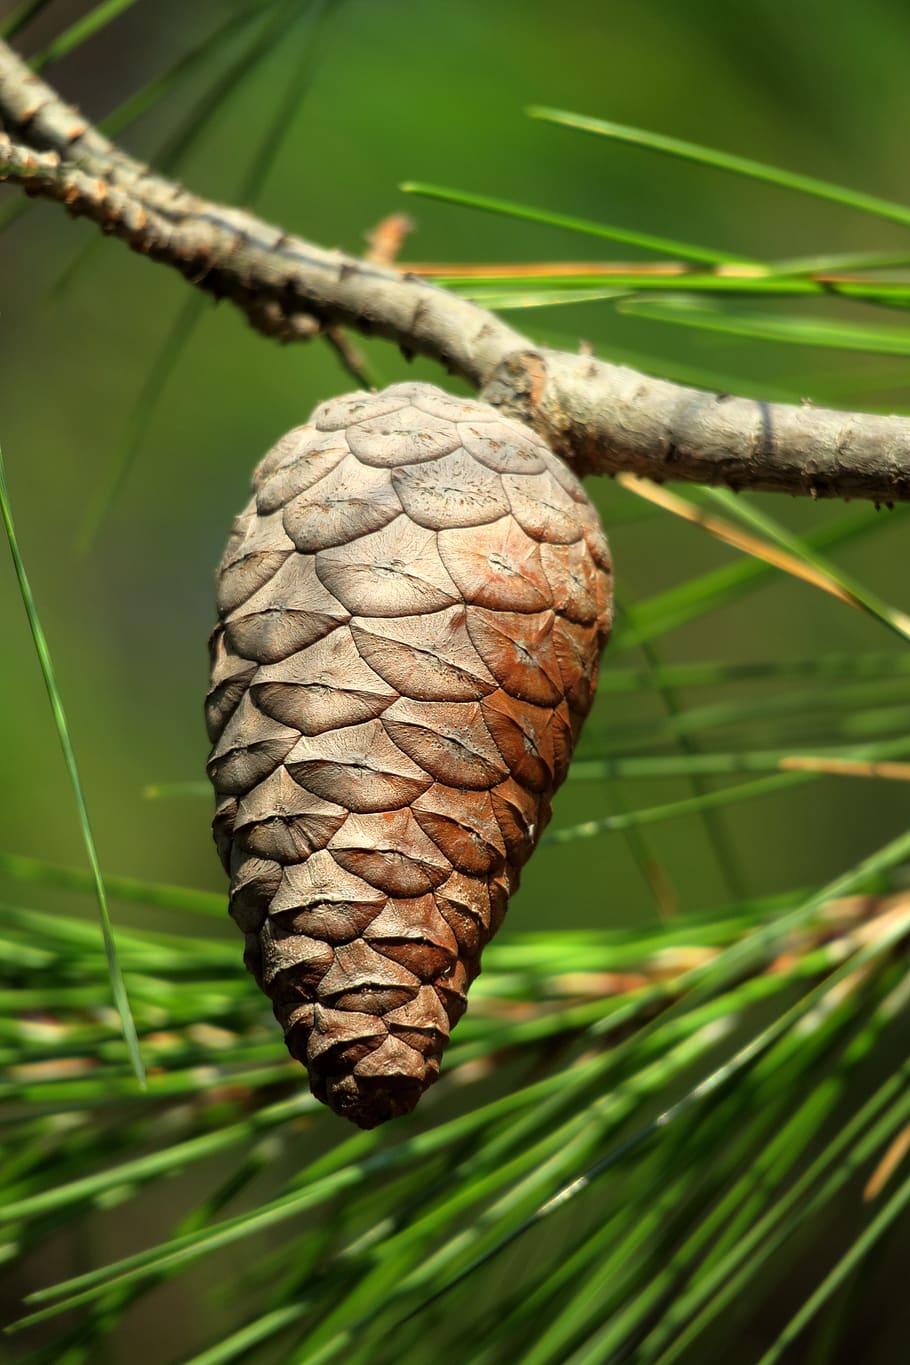 tap, brown, pine, pine cones, tree, mediterranean, conifer, closed, close-up, focus on foreground